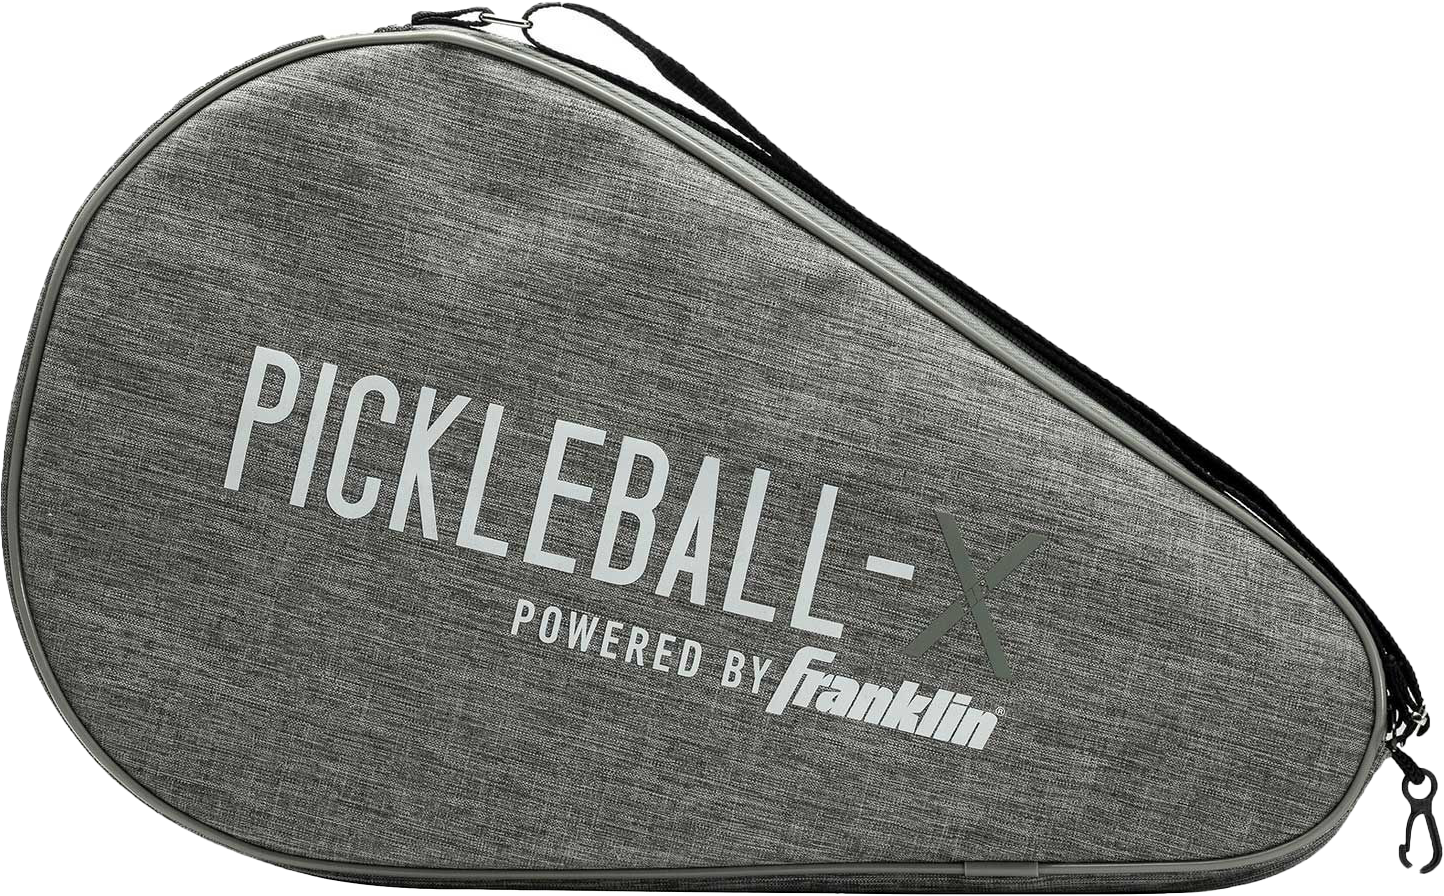 Franklin Pickleball Paddle Bag - grey with convenient carry strap.